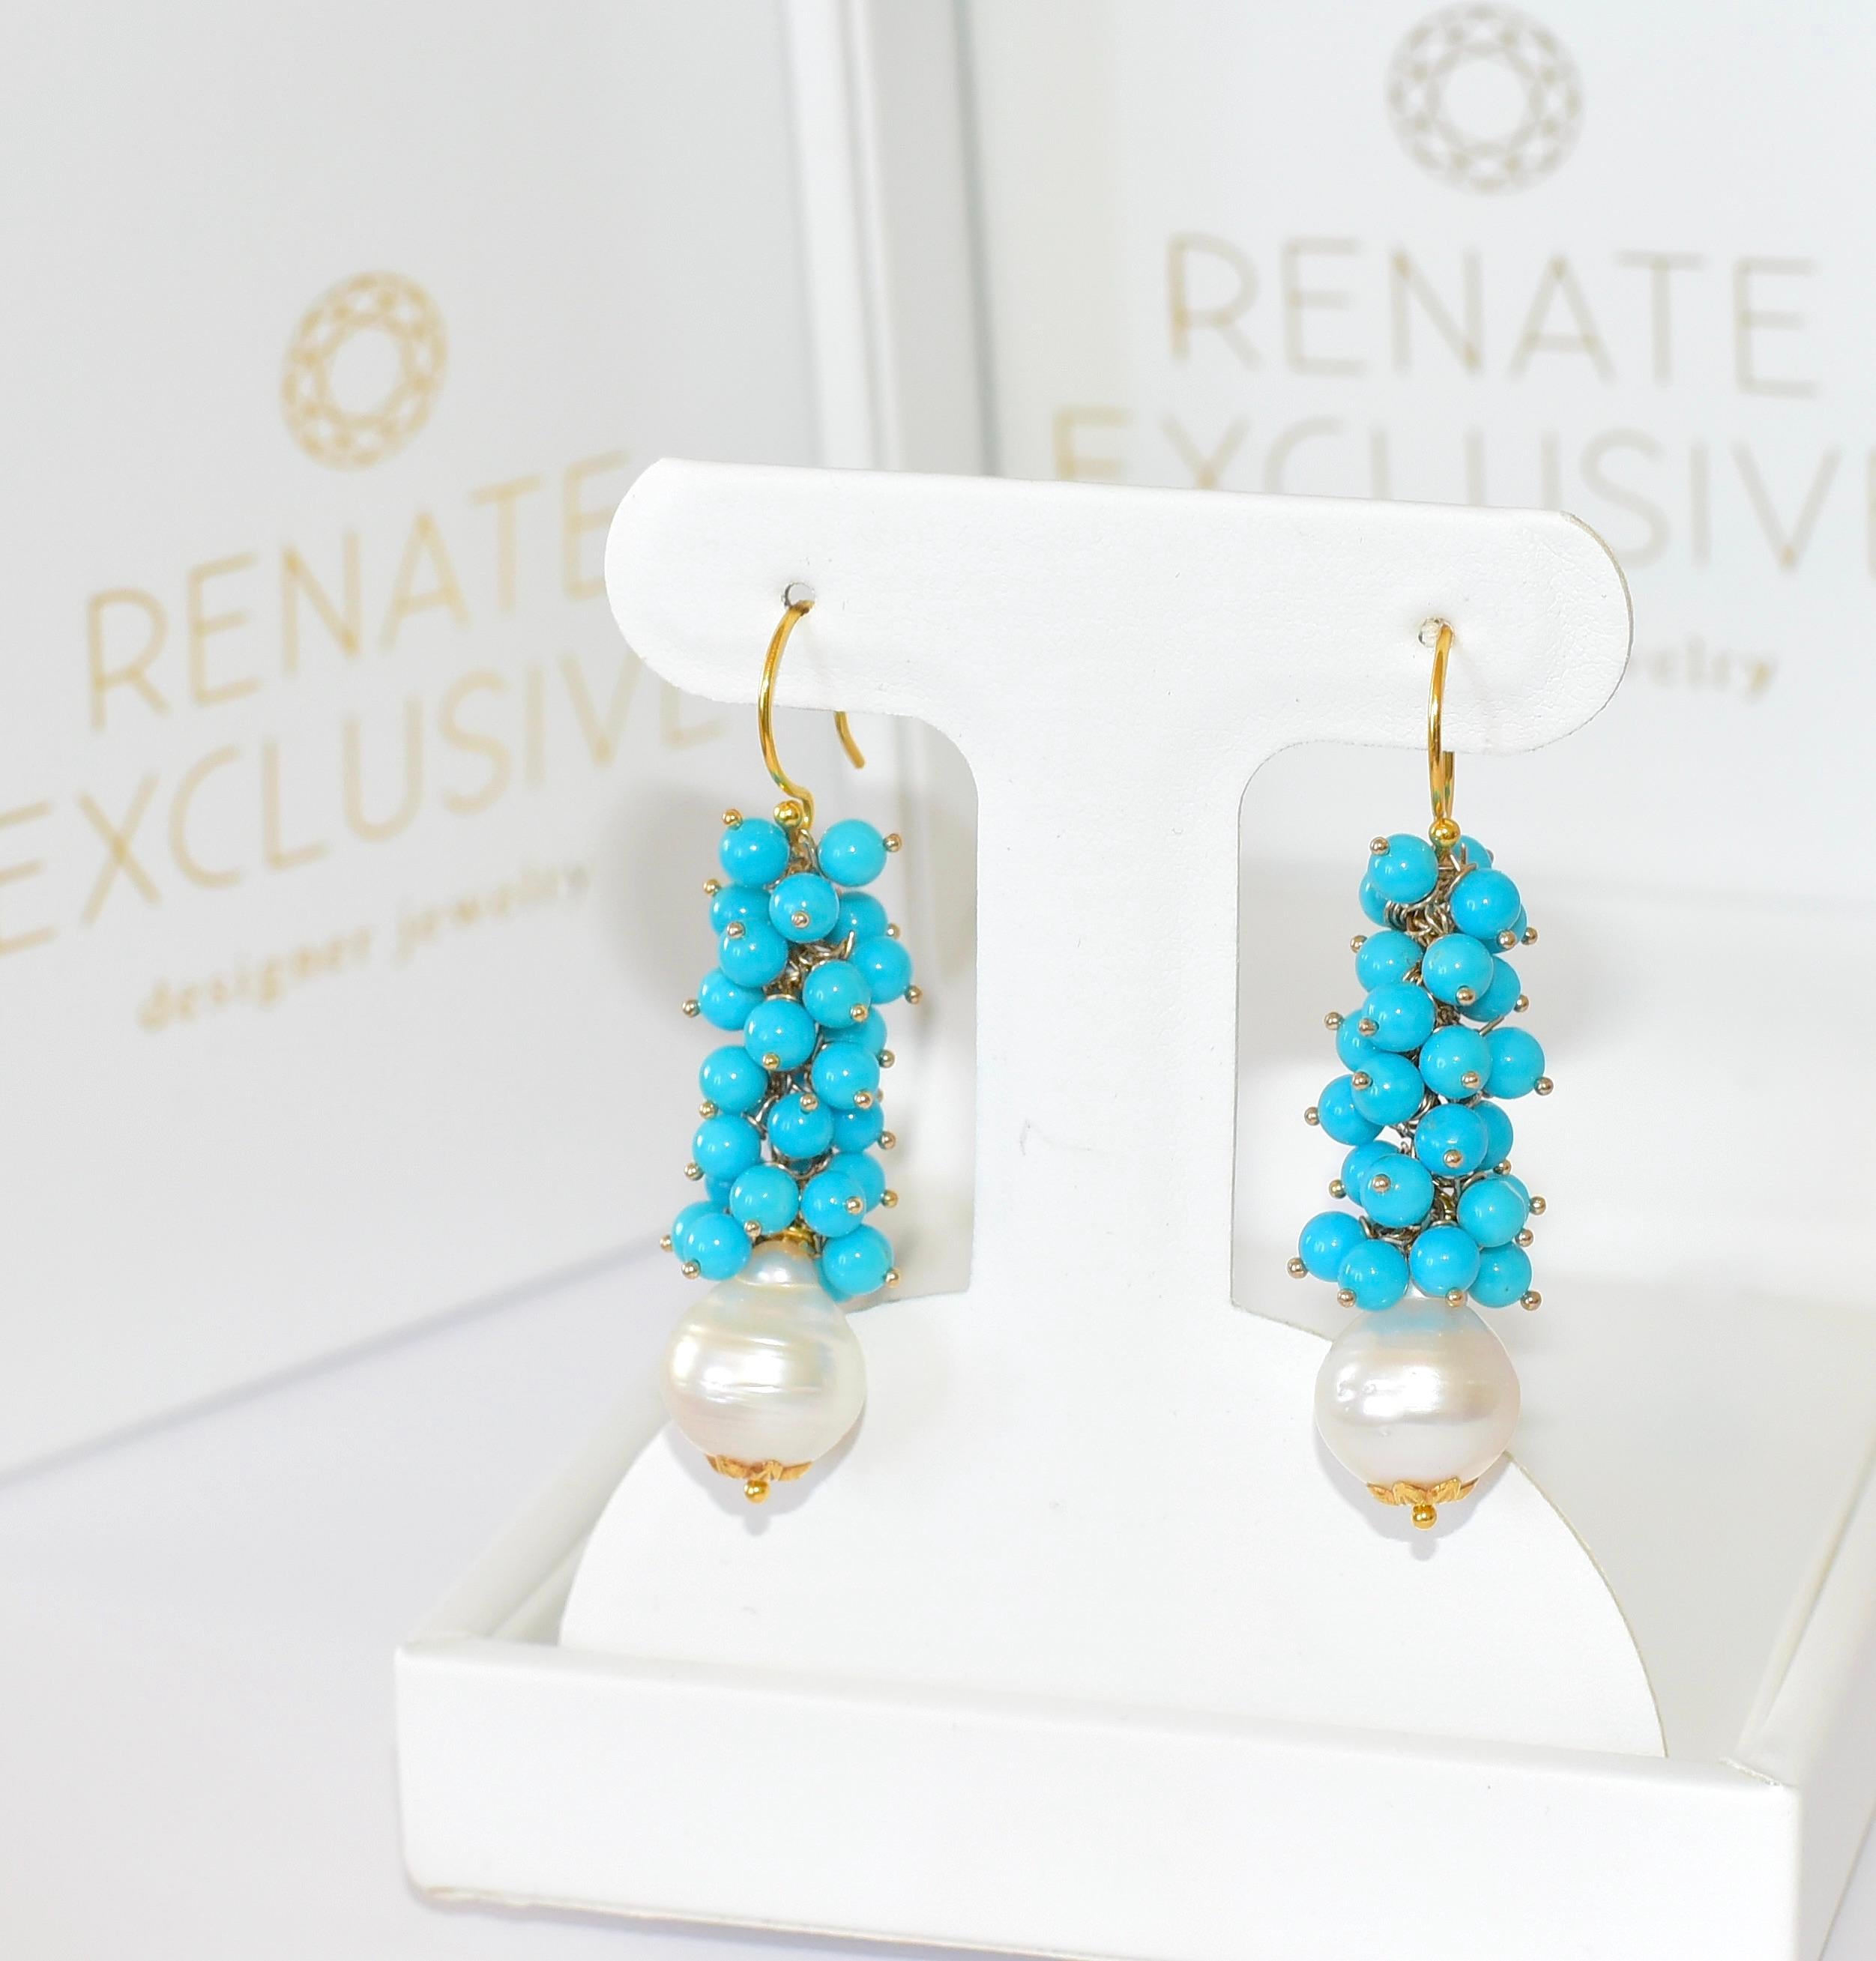 Beautiful turquoise (beads size 4.3mm) wonderfully moving earrings, Renate Exclusive must-have style!
White South Sea Baroque Pearl size is 13.5 mm. 
The total length of the earrings is 1.7 inches
18K Solid Yellow Gold Thick (strong) Earwire with